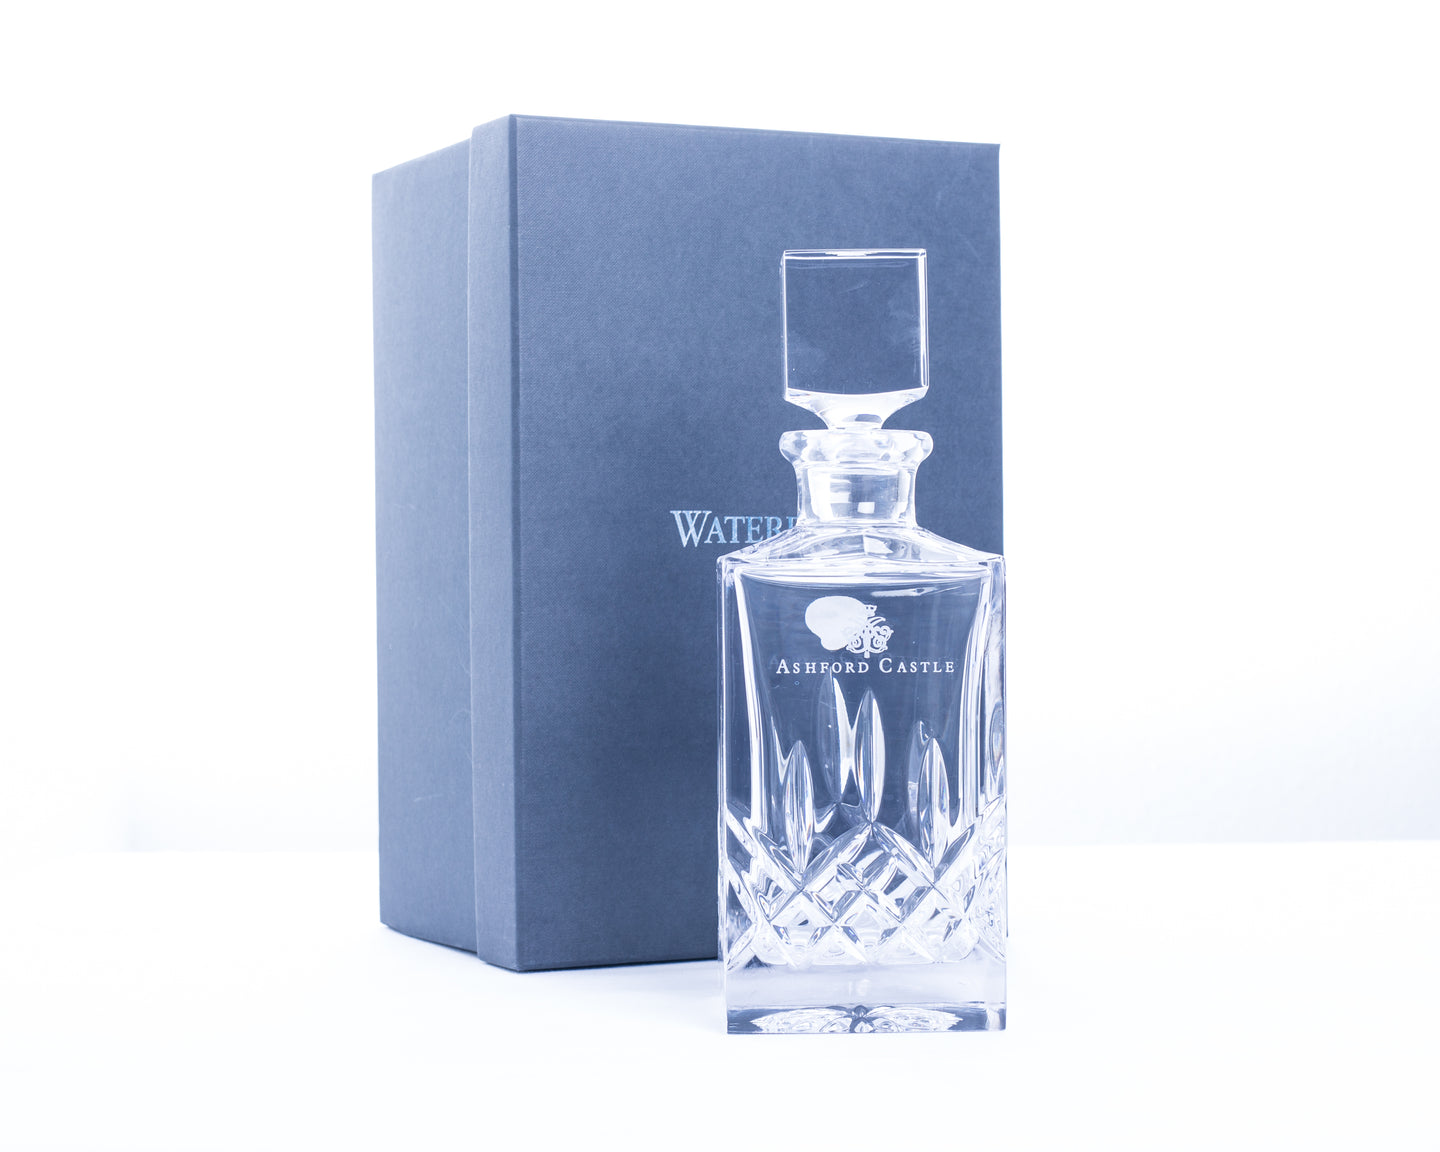 Ashford Castle Waterford Crystal Decanter Mrs Tea's Boutique and Bakery